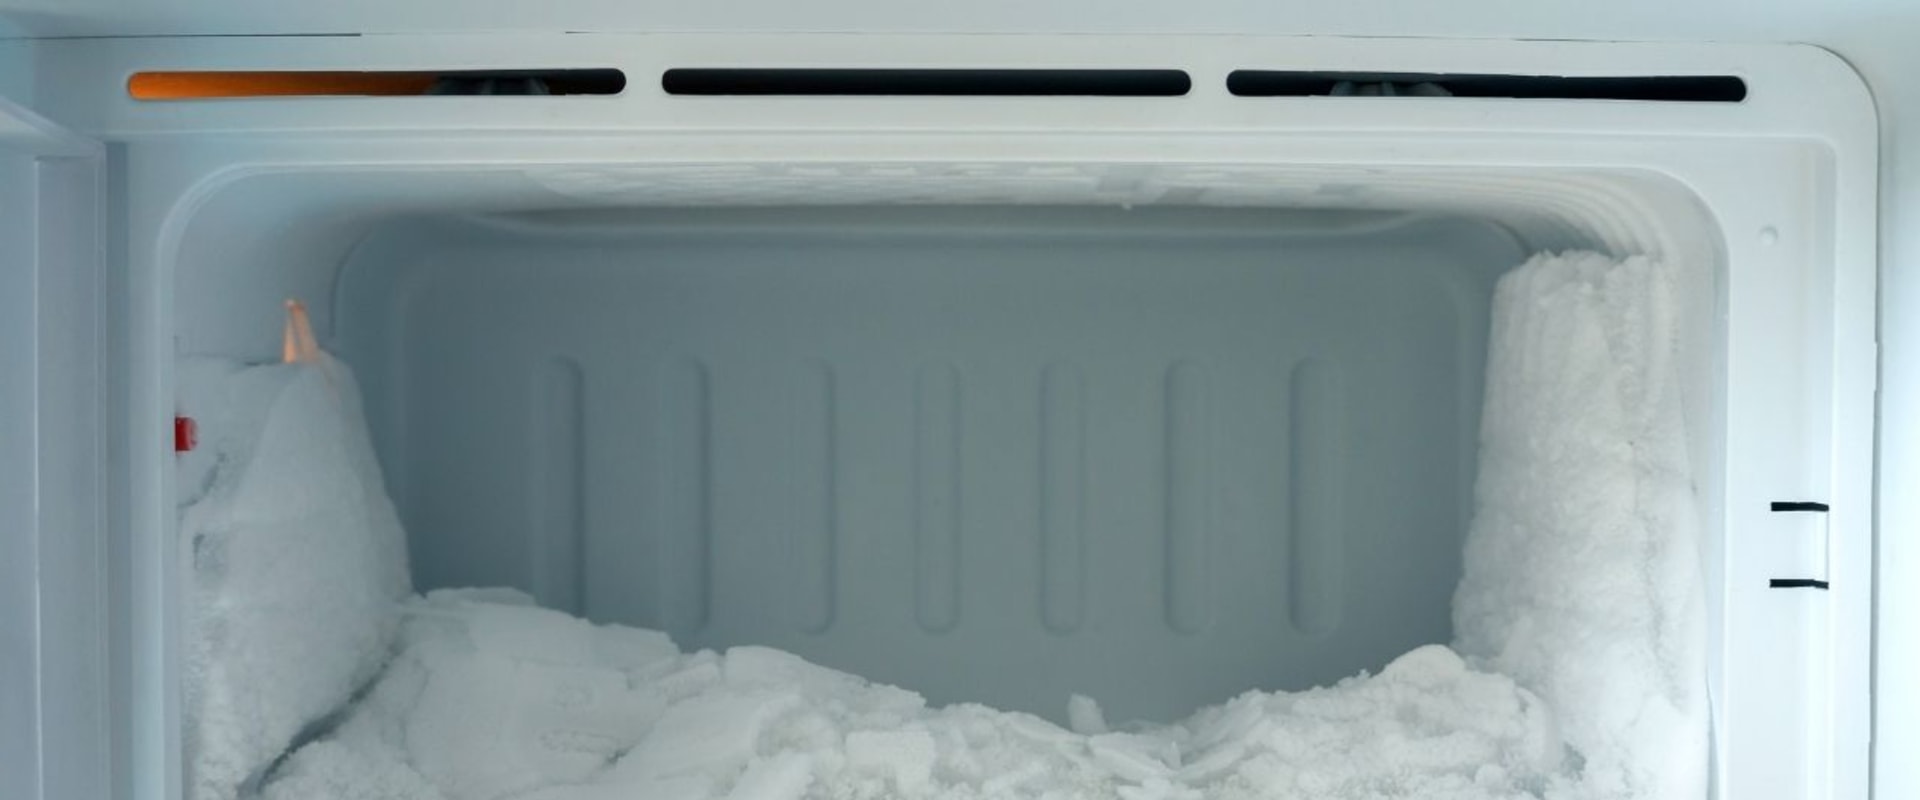 Expert Tips for Fixing Your Freezer